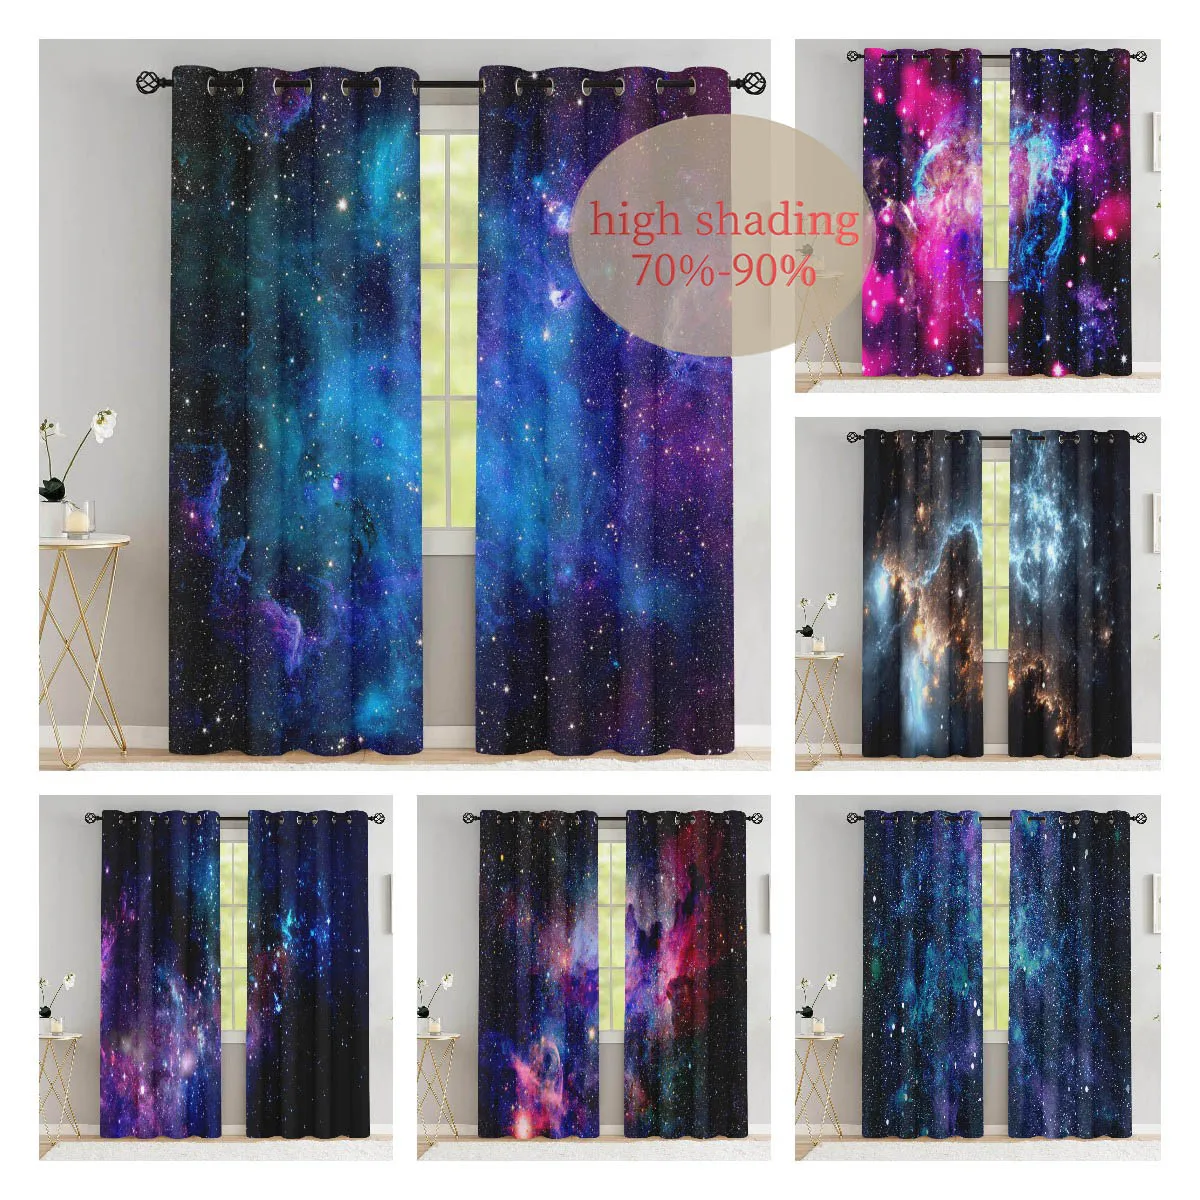 

Galaxy Curtain for Living Room Universe Nebula Curtain Blue Starry Sky Night Star Planet Outer Space Drapes High Shading 70%-90%